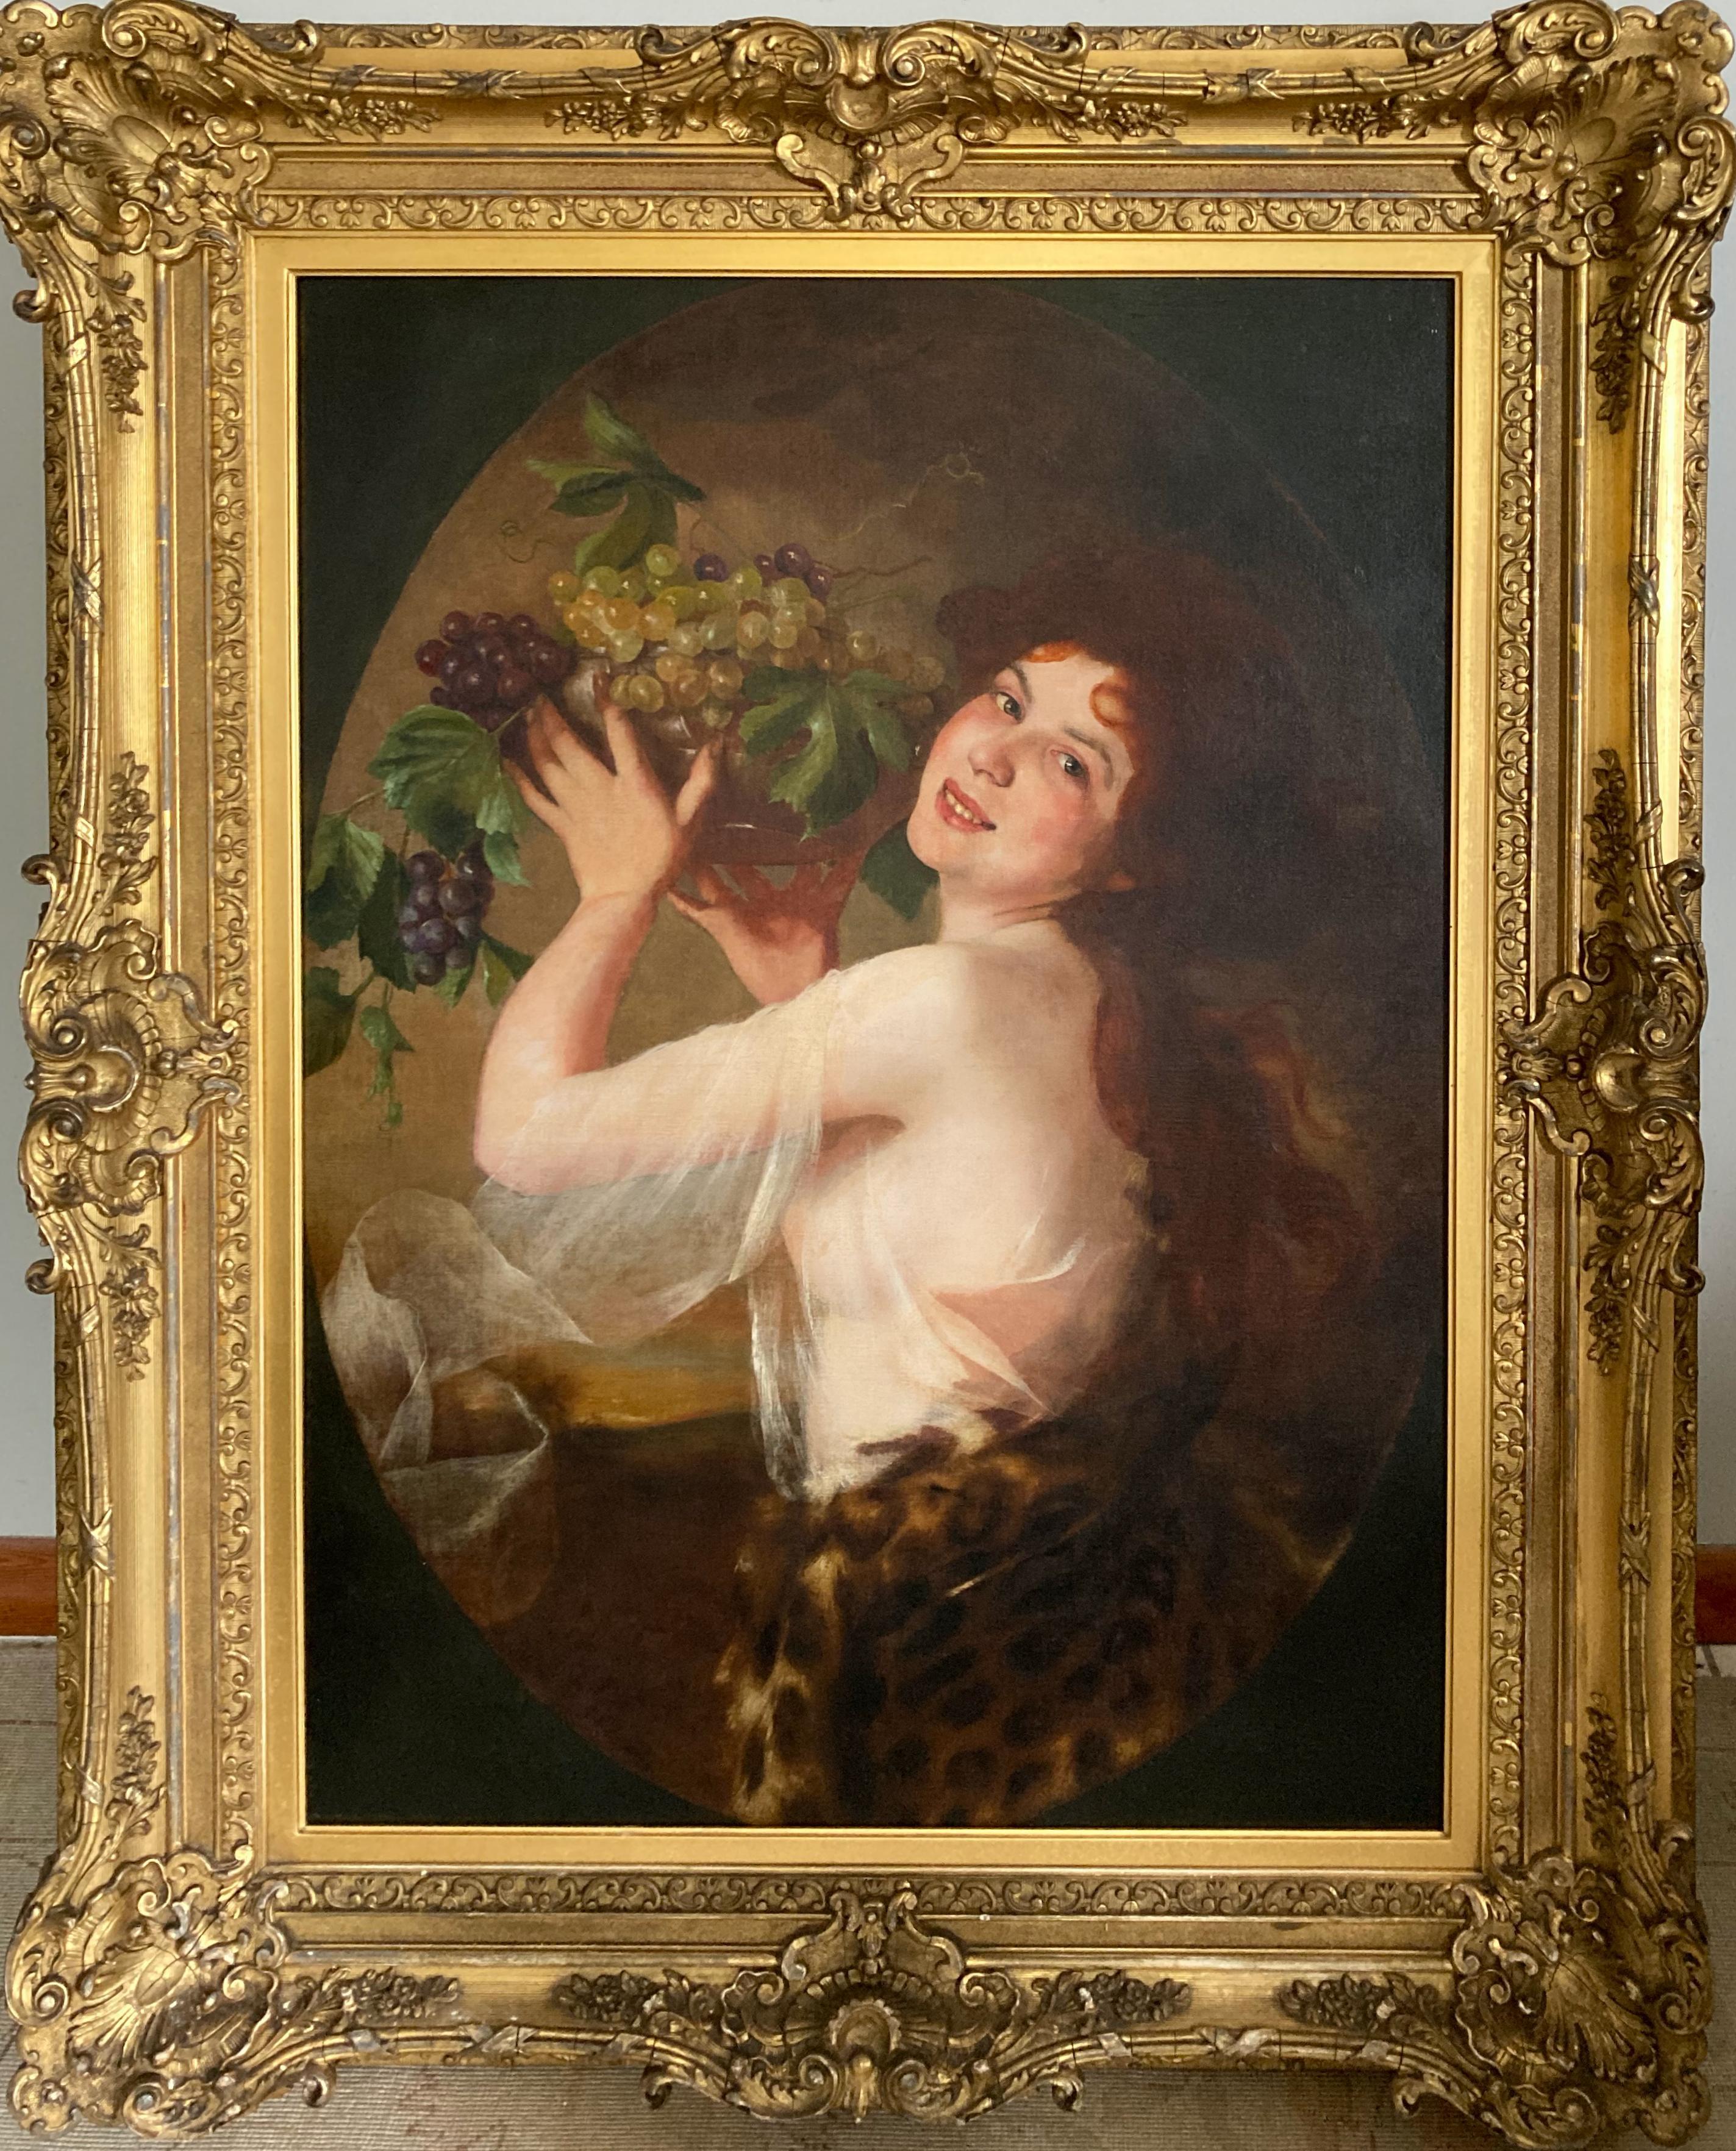 Unknown Portrait Painting - Woman With Grapes (ex. Mobile Museum of Art)